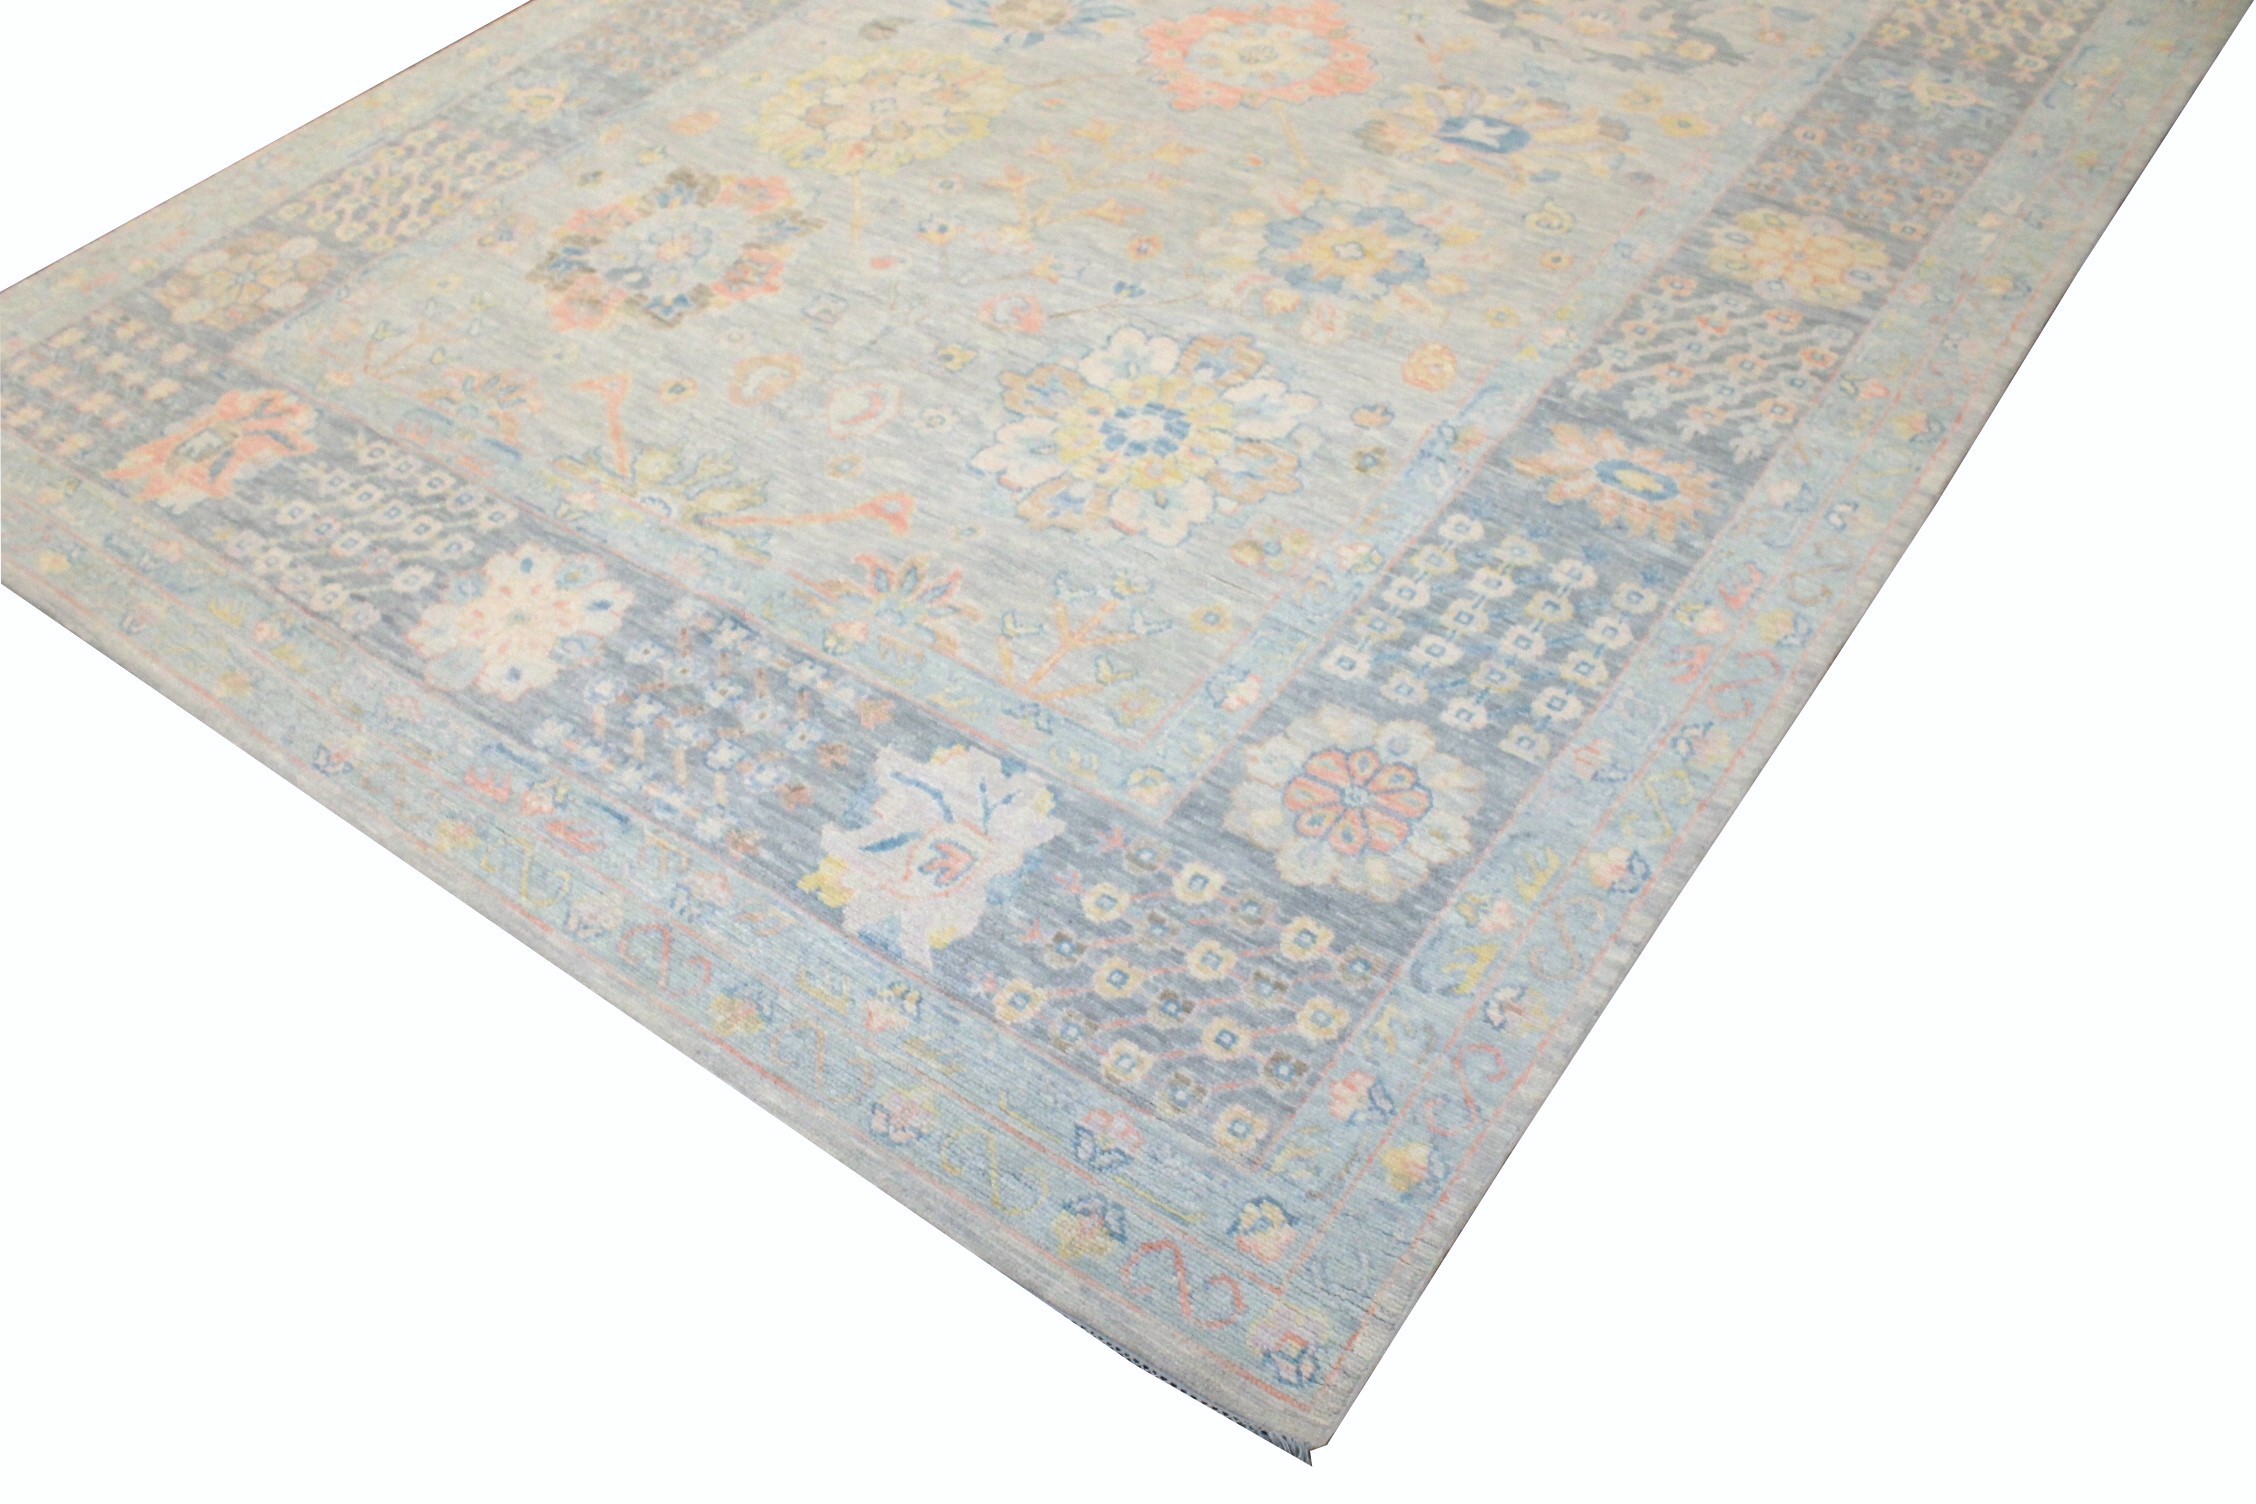 10x14 Oushak Hand Knotted Wool Area Rug - MR028370